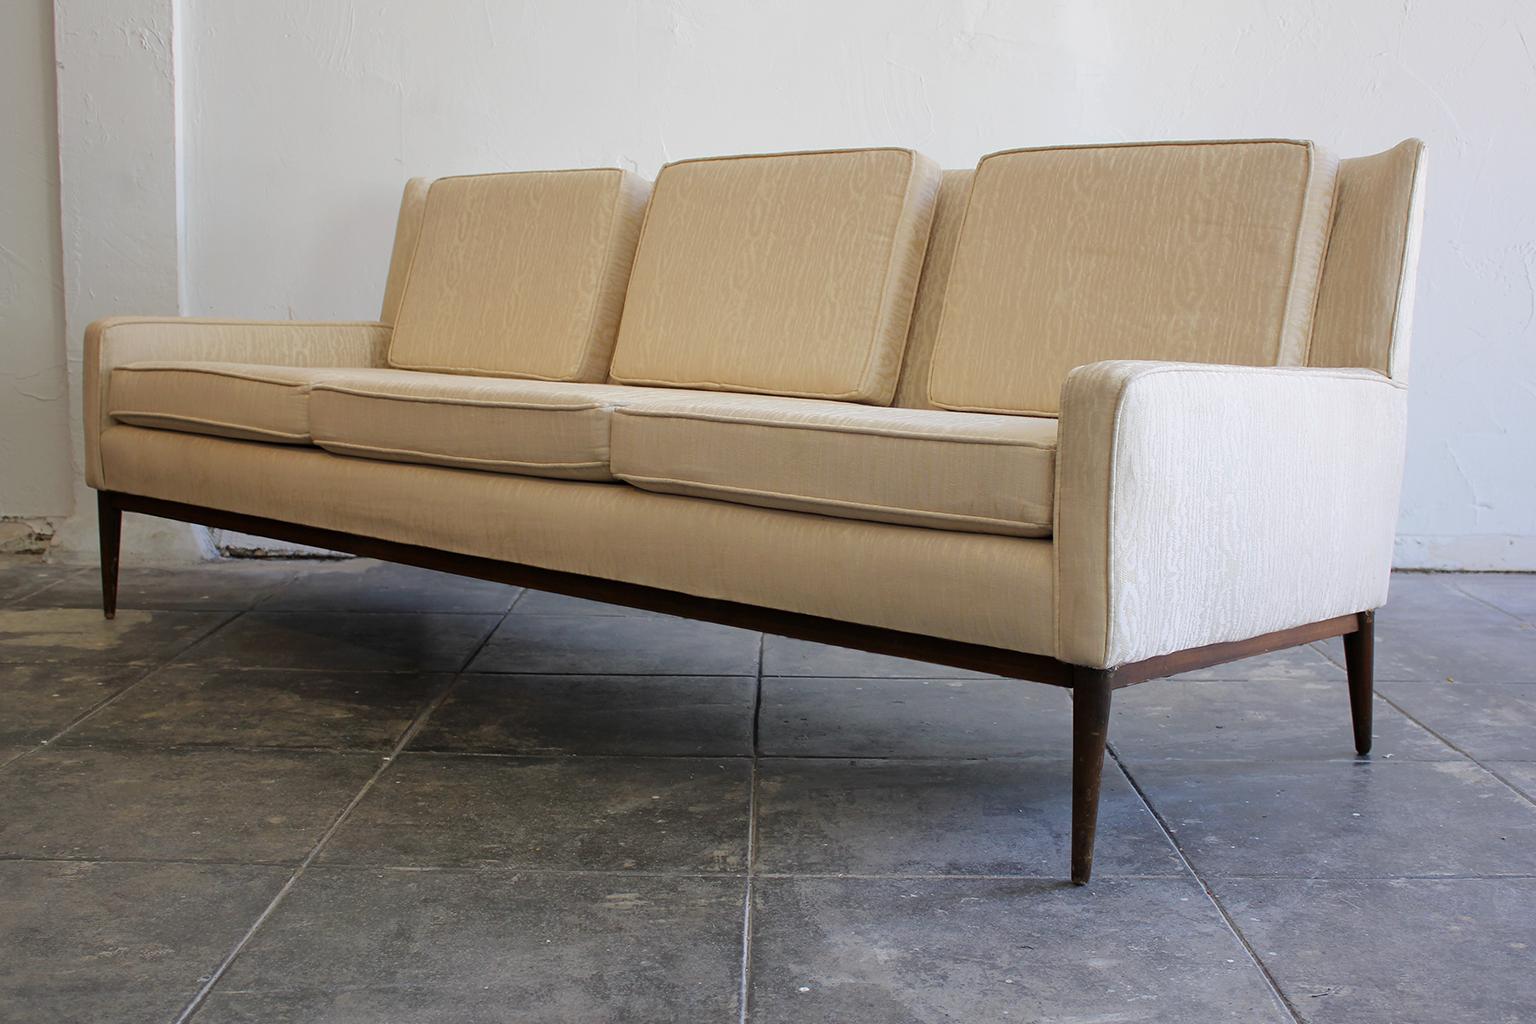 Elegant modern design 3-seat wingback sofa designed by Paul McCobb for Directional, circa 1950s. This has been intentionally left in as-found condition. Upholstery is in good condition and can be used as-is. Minor wear from use as pictured. Light